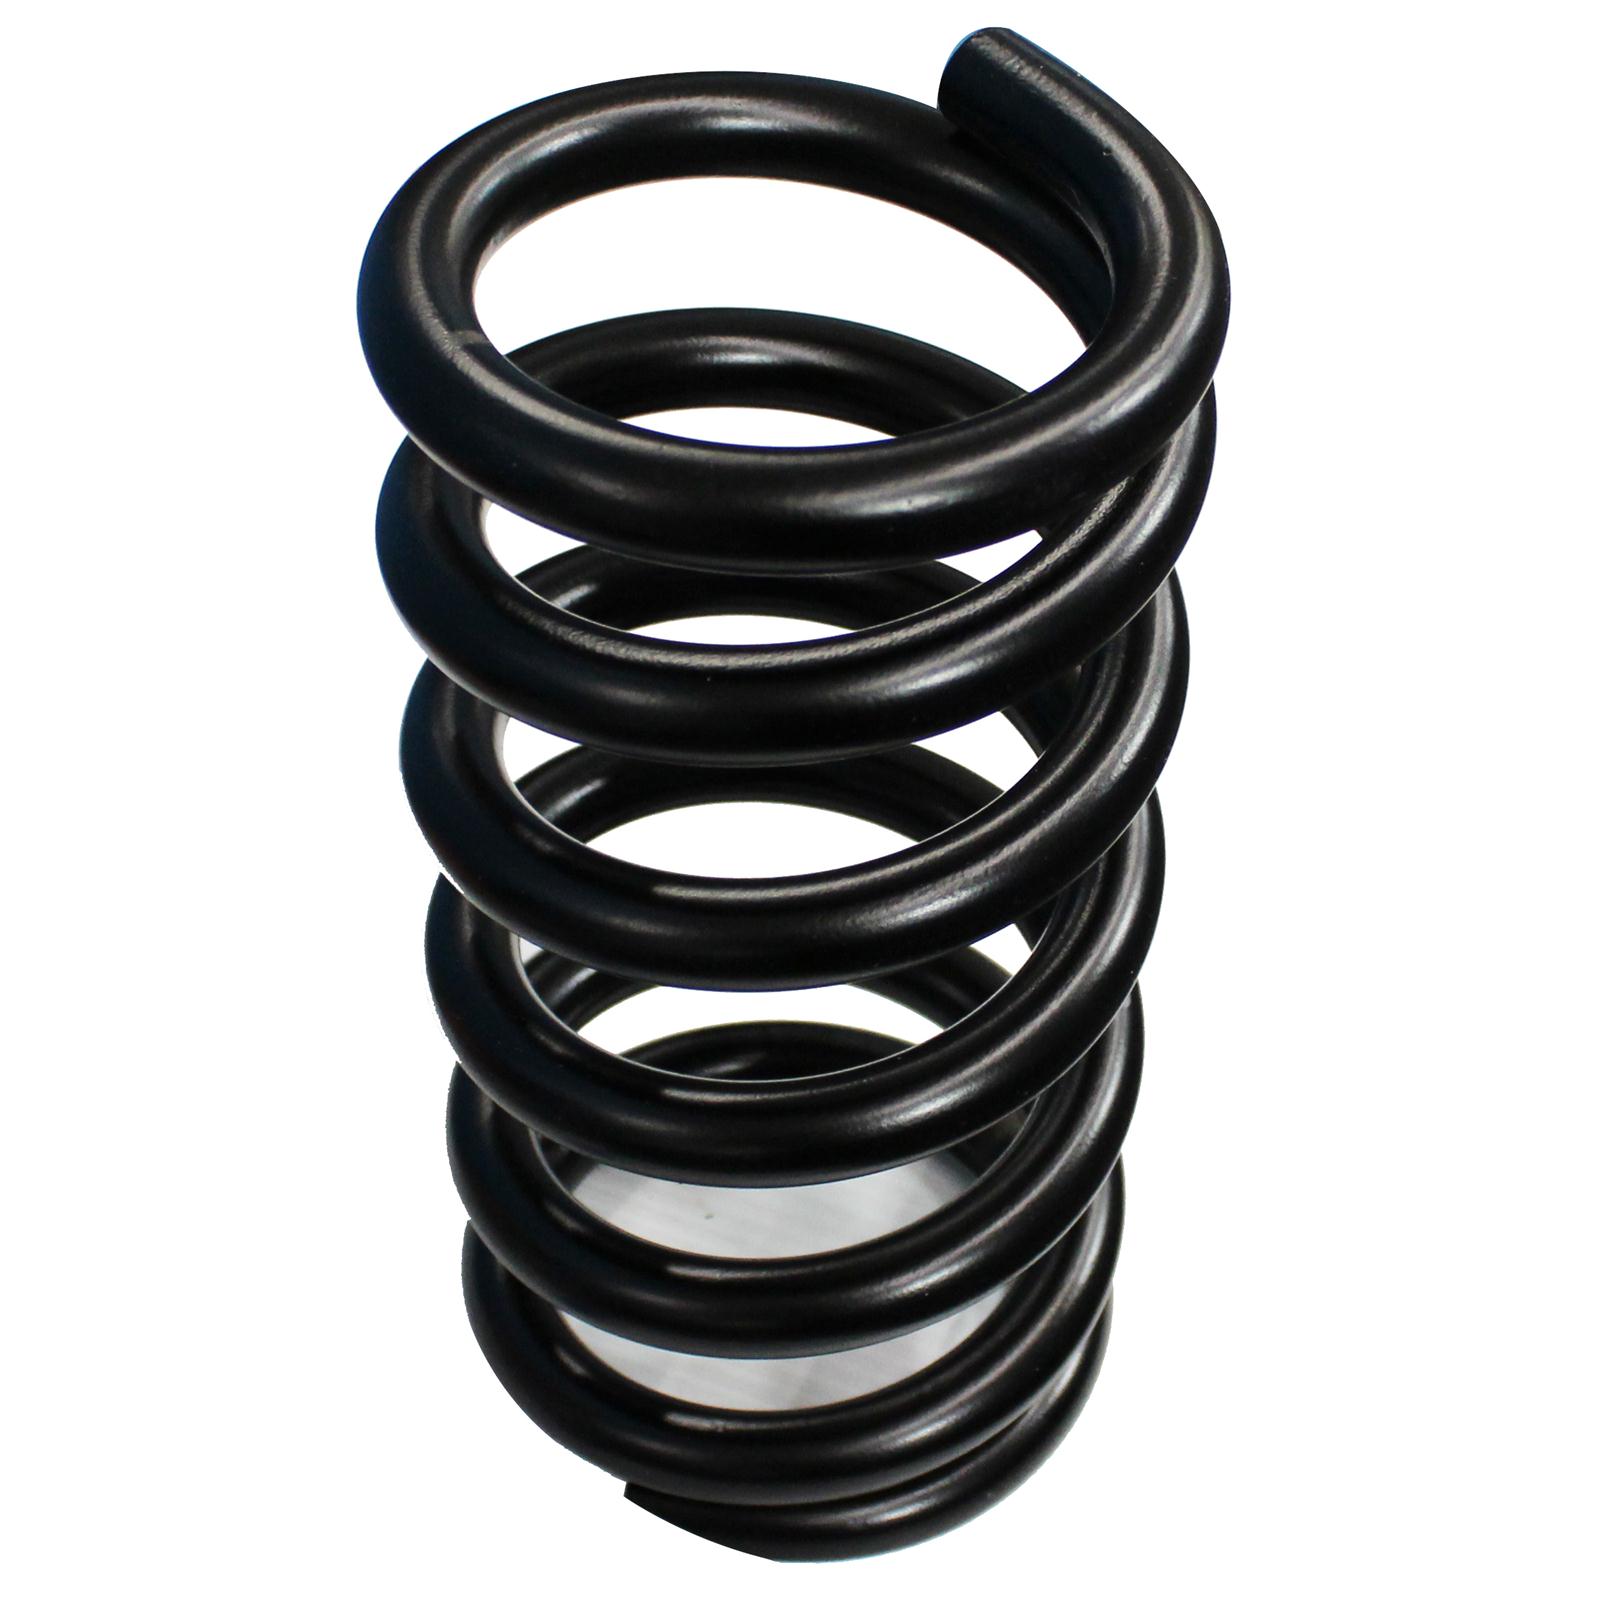 AFCO Racing 20800-6 AFCO Racing Conventional Coil Springs | Summit Racing